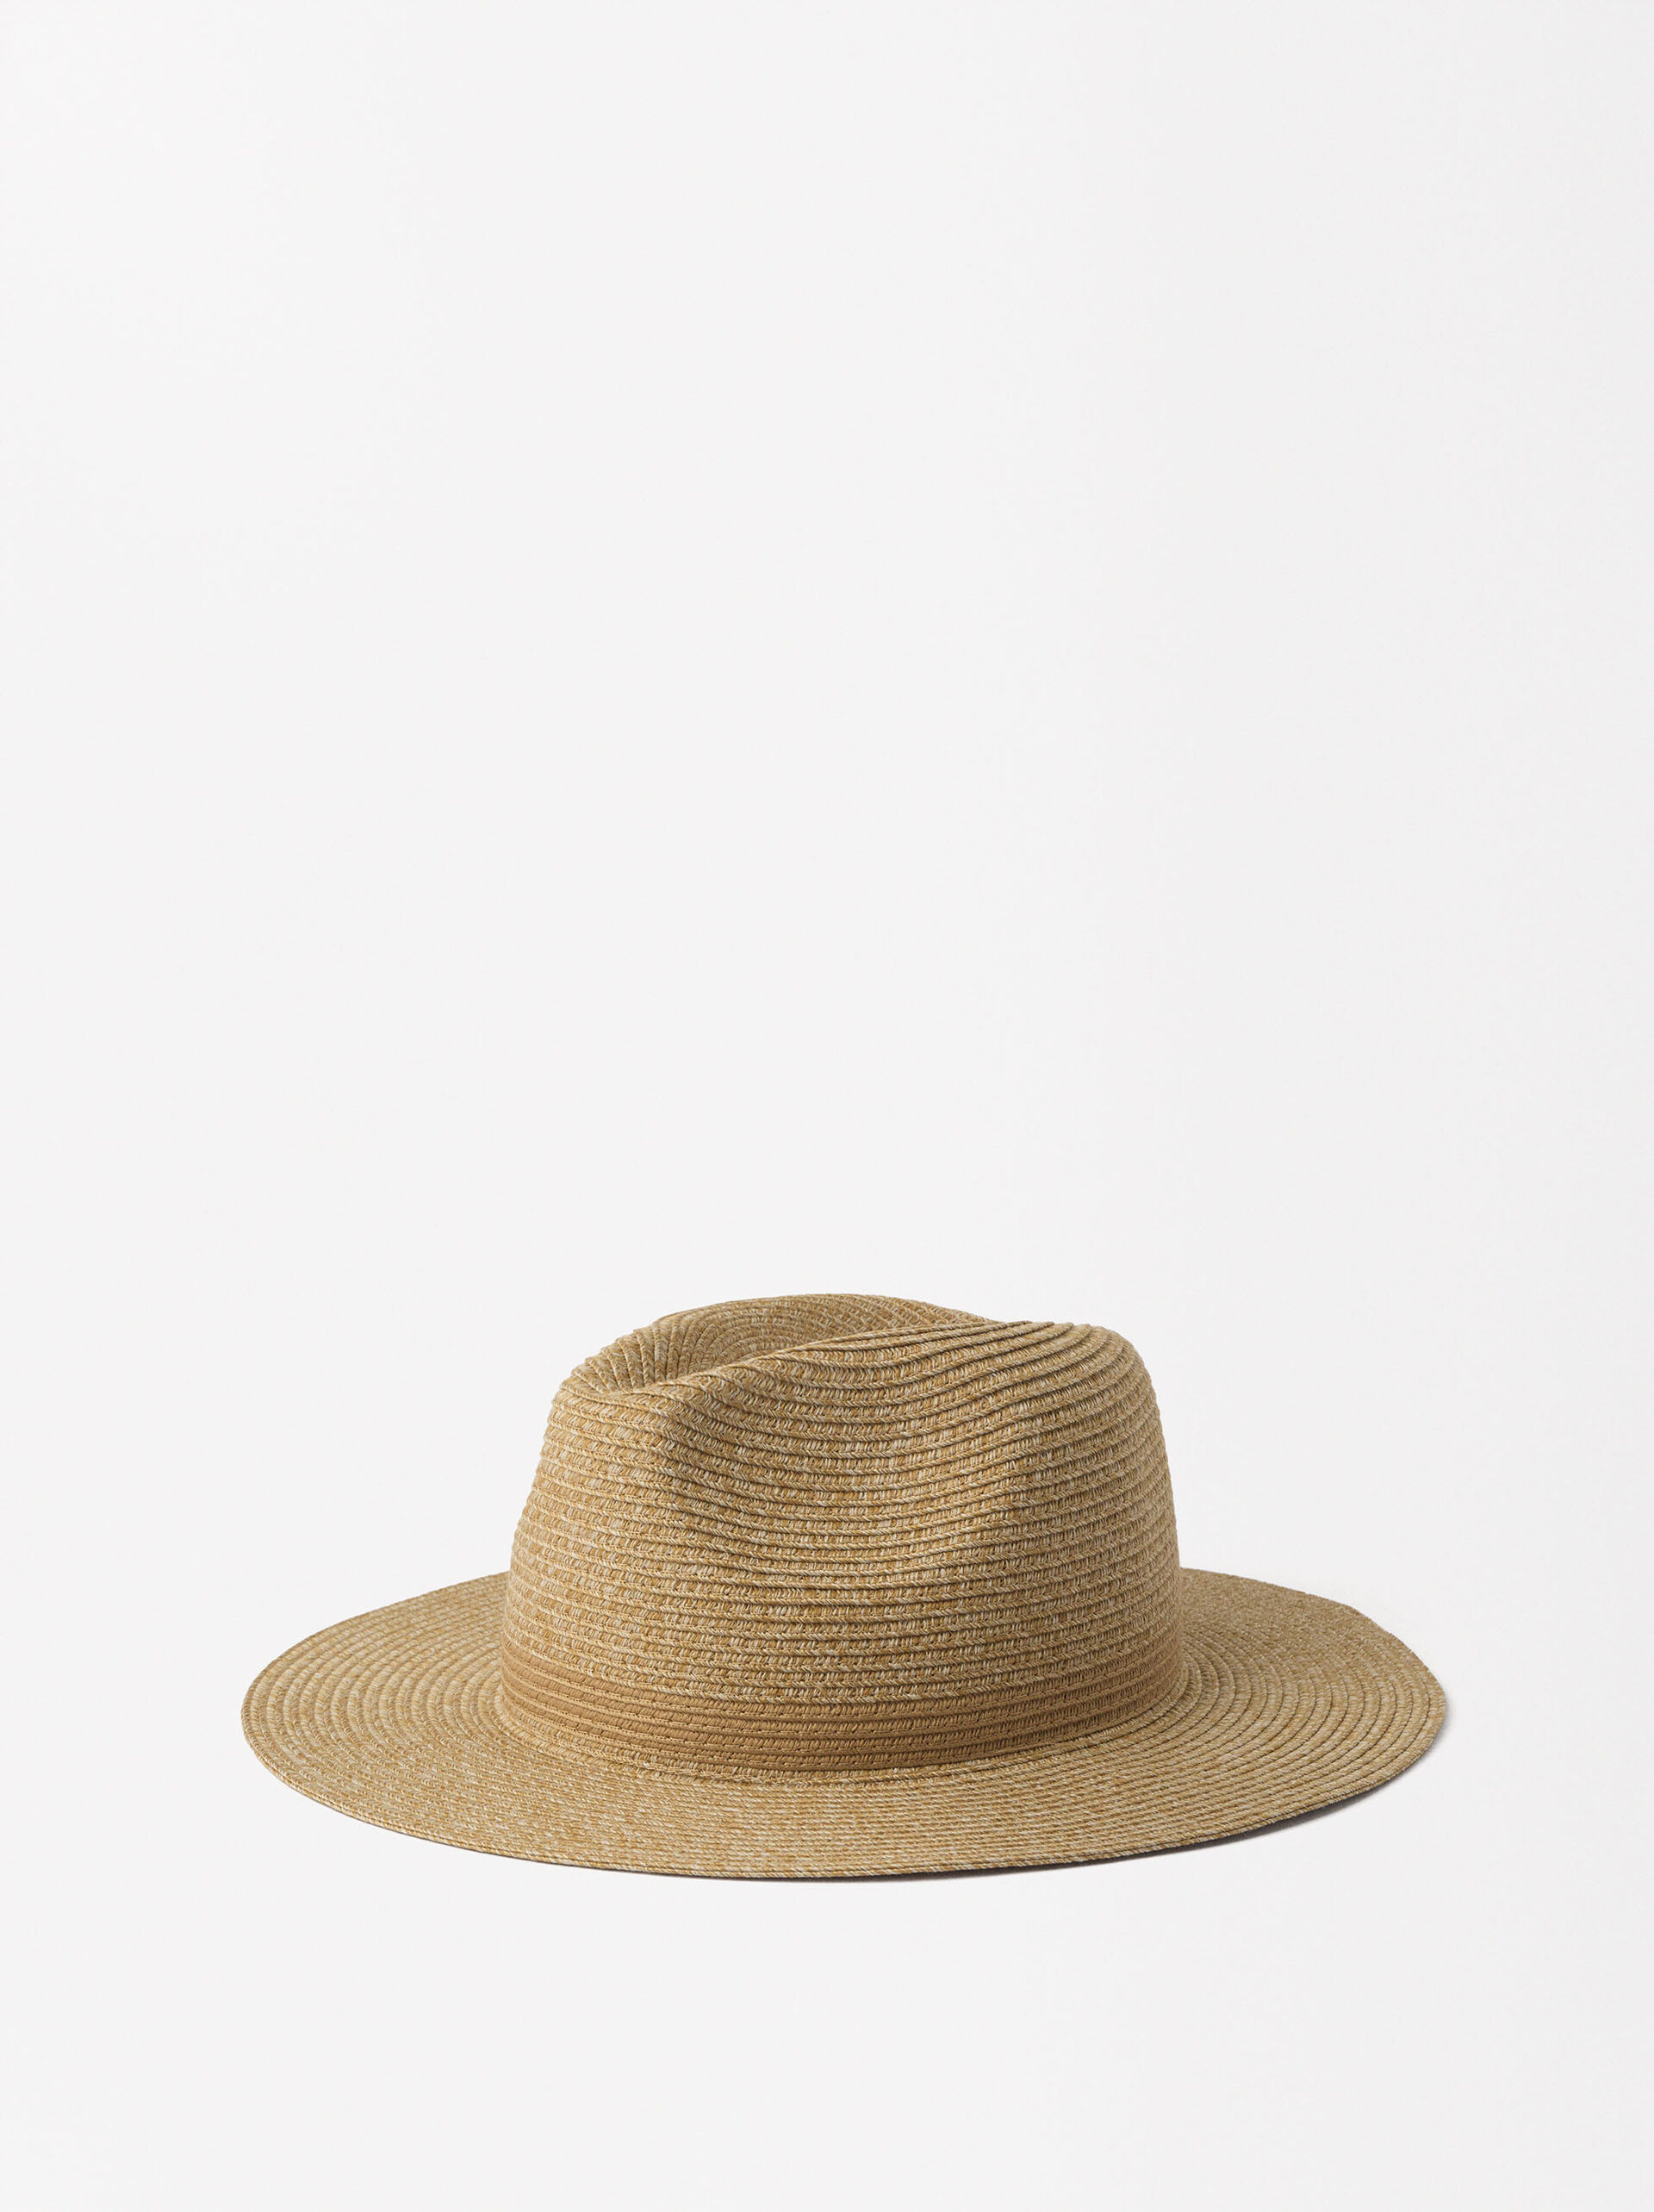 Woven Hat image number 0.0